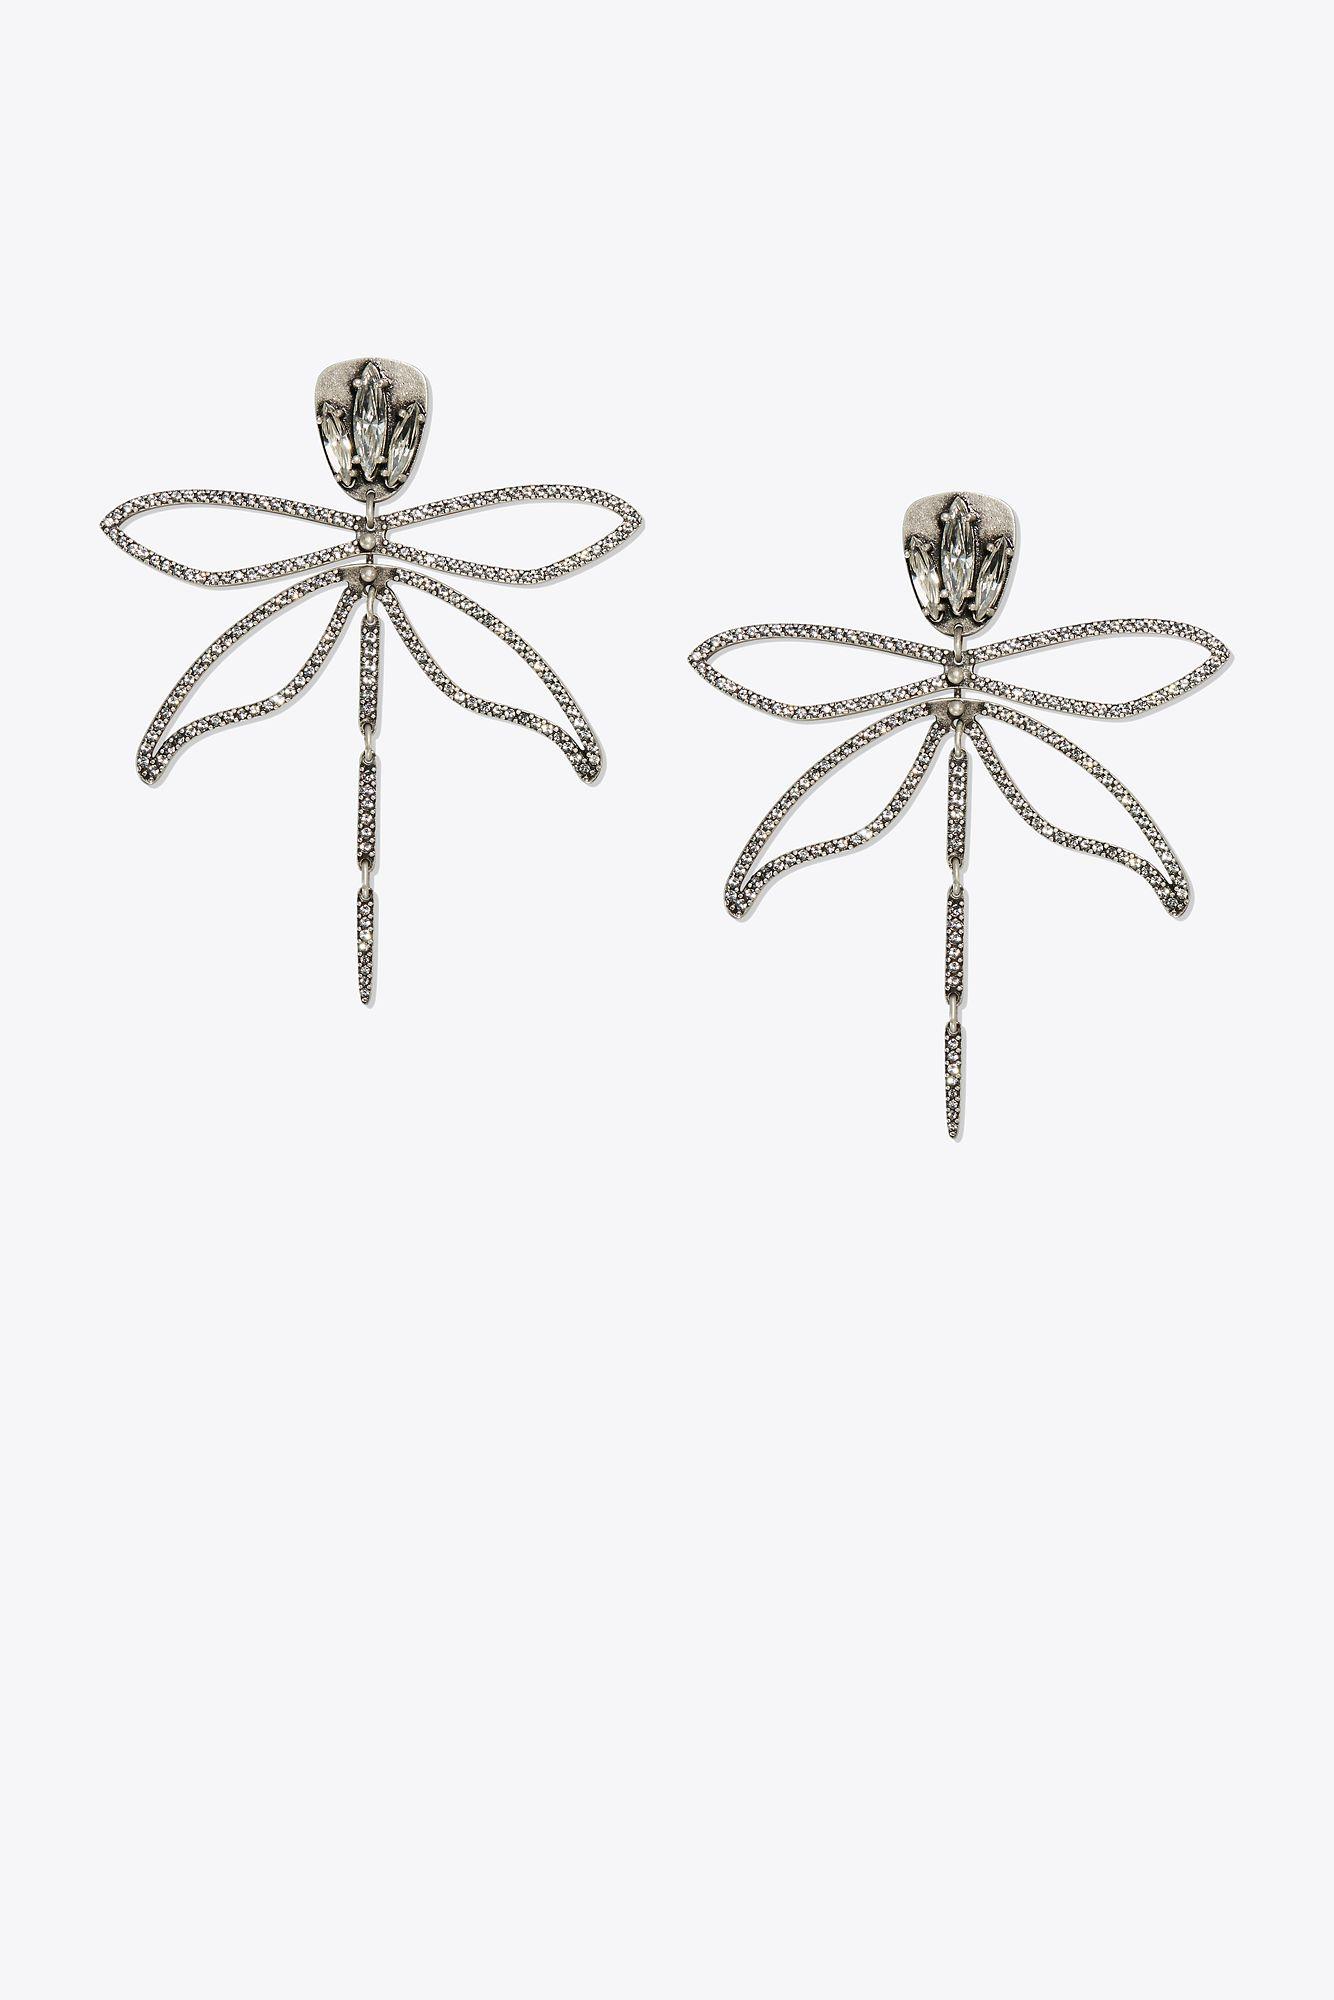 Tory Burch Dragonfly Earrings Discount, SAVE 46% 